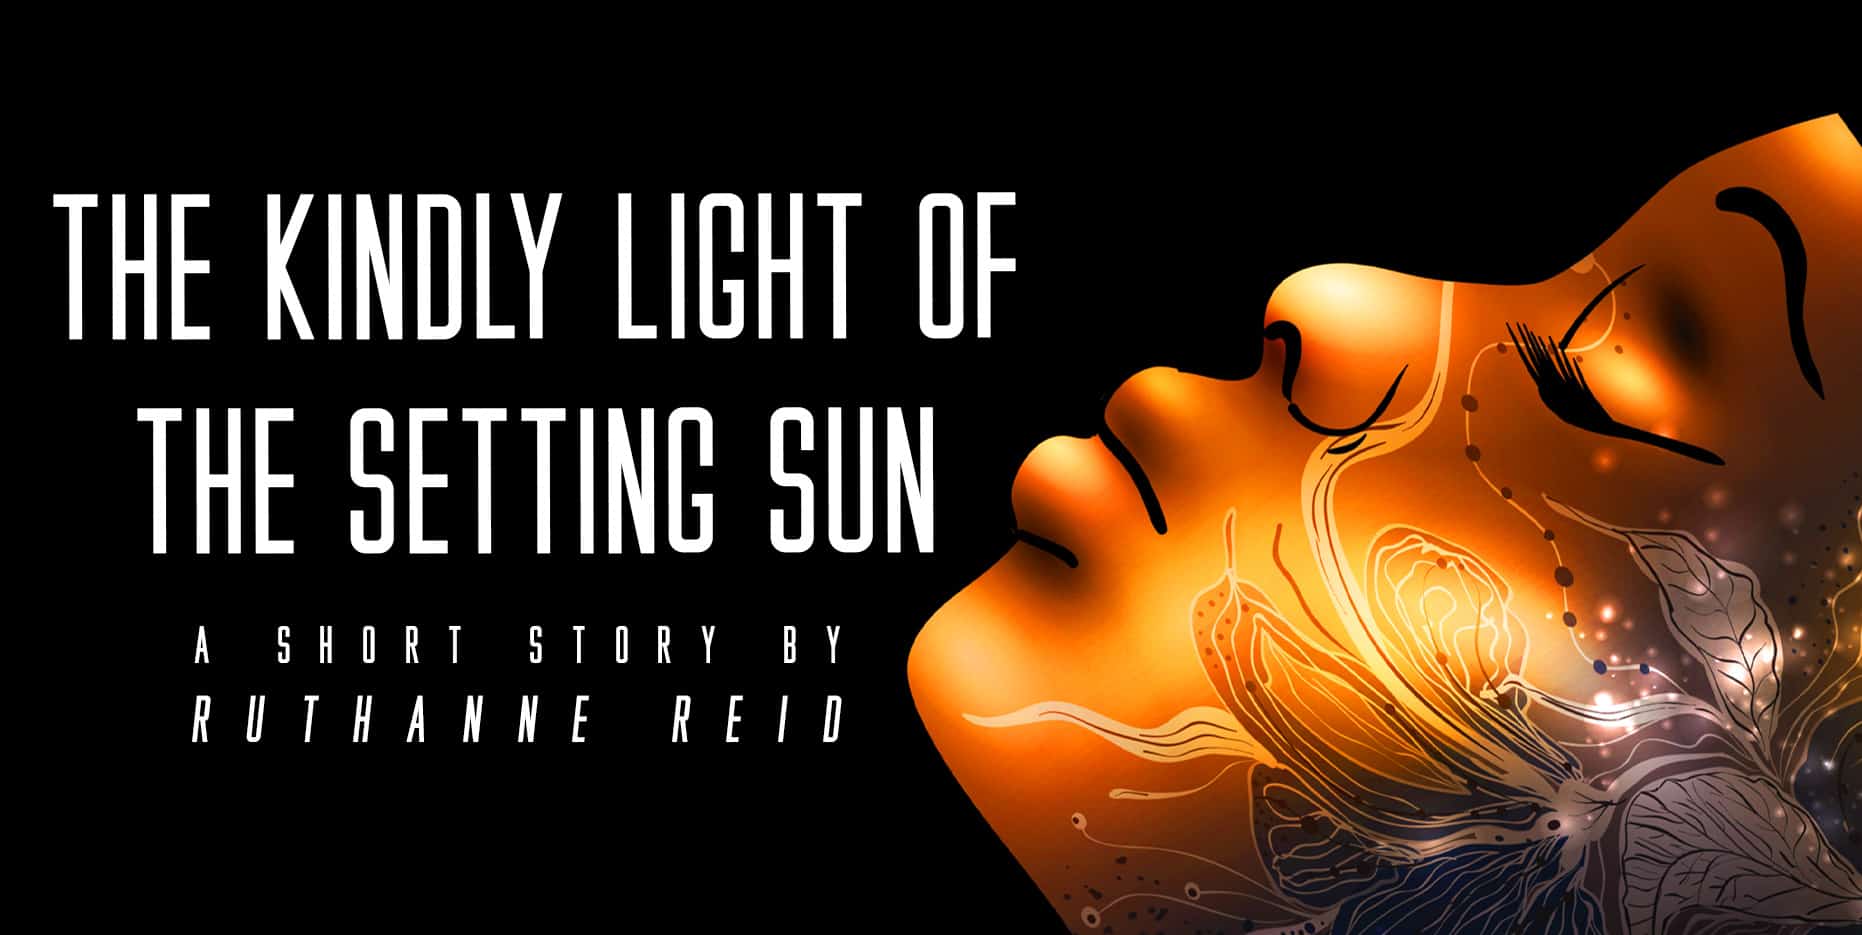 The Kindly Light of the Setting Sun: a short story by Ruthanne Reid